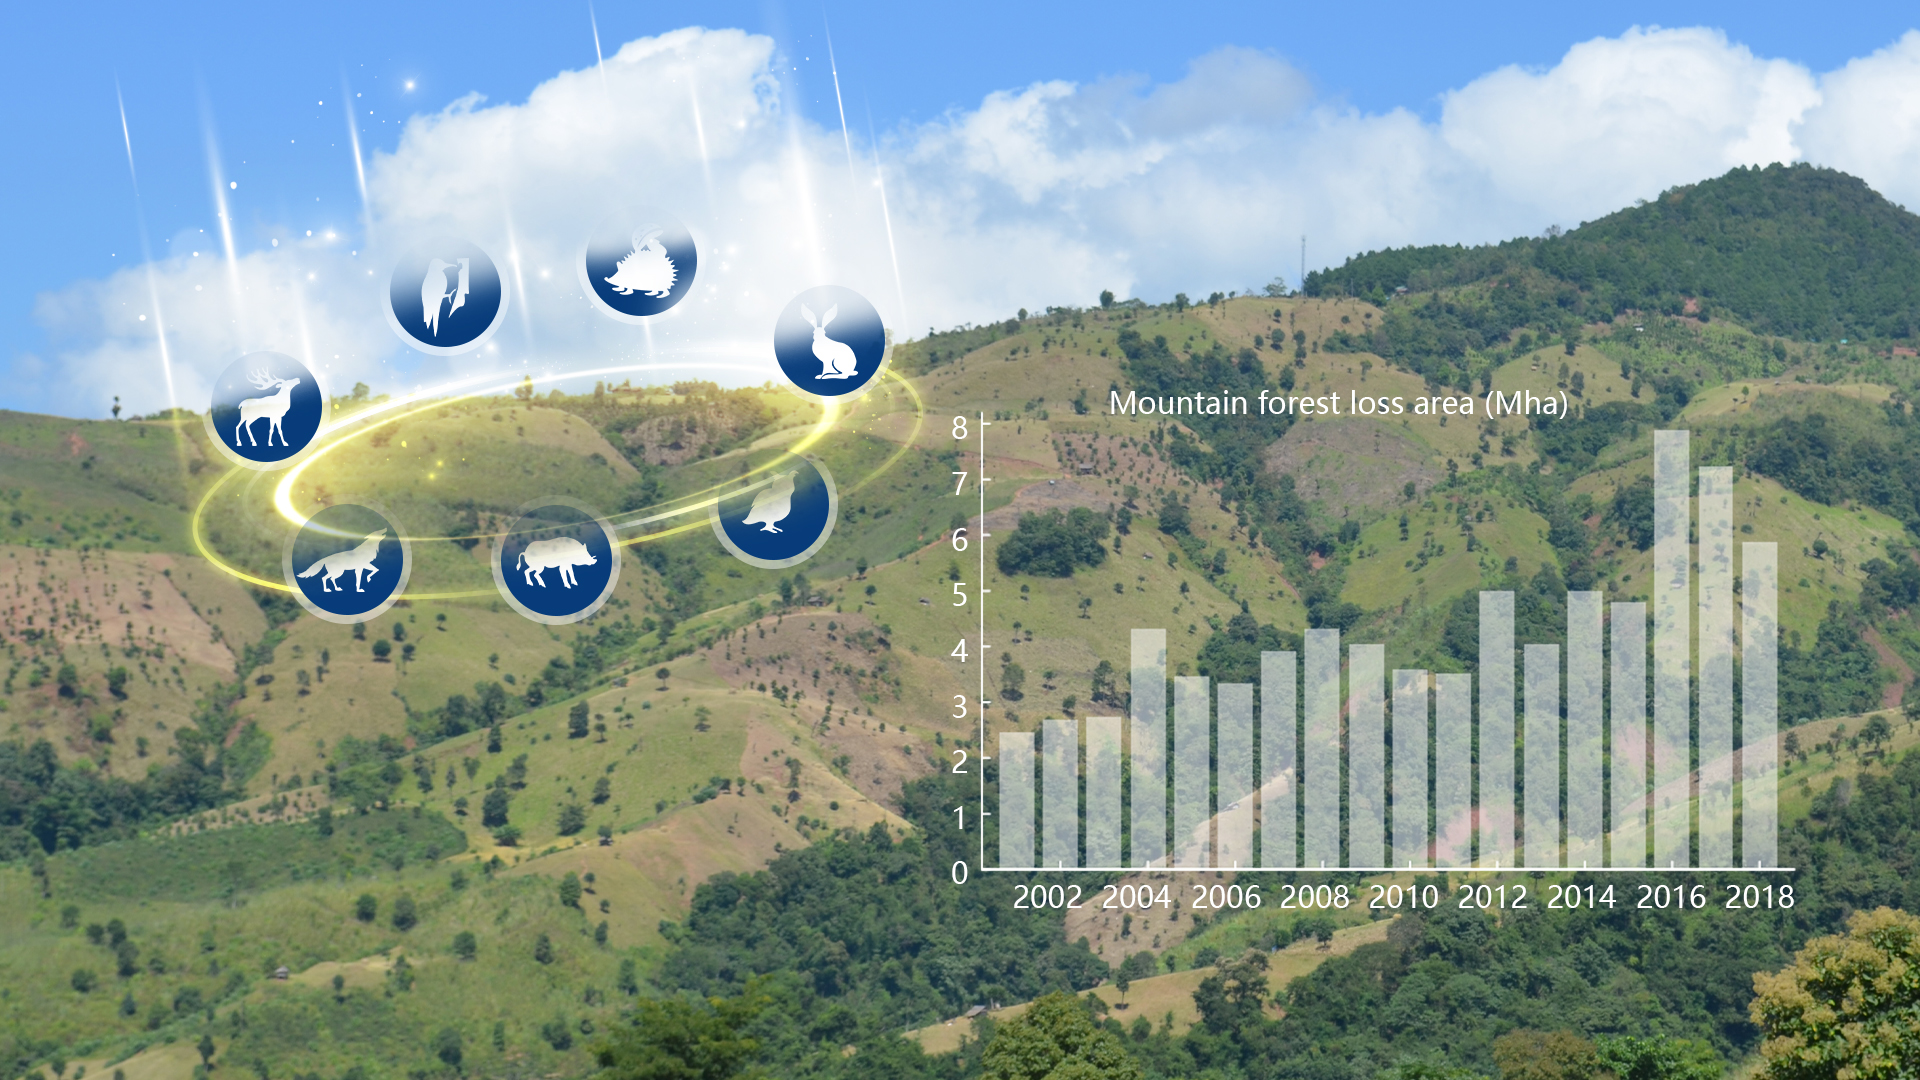 Serious threat to biodiversity hotspots due to mountain forests being lost at accelerating rate